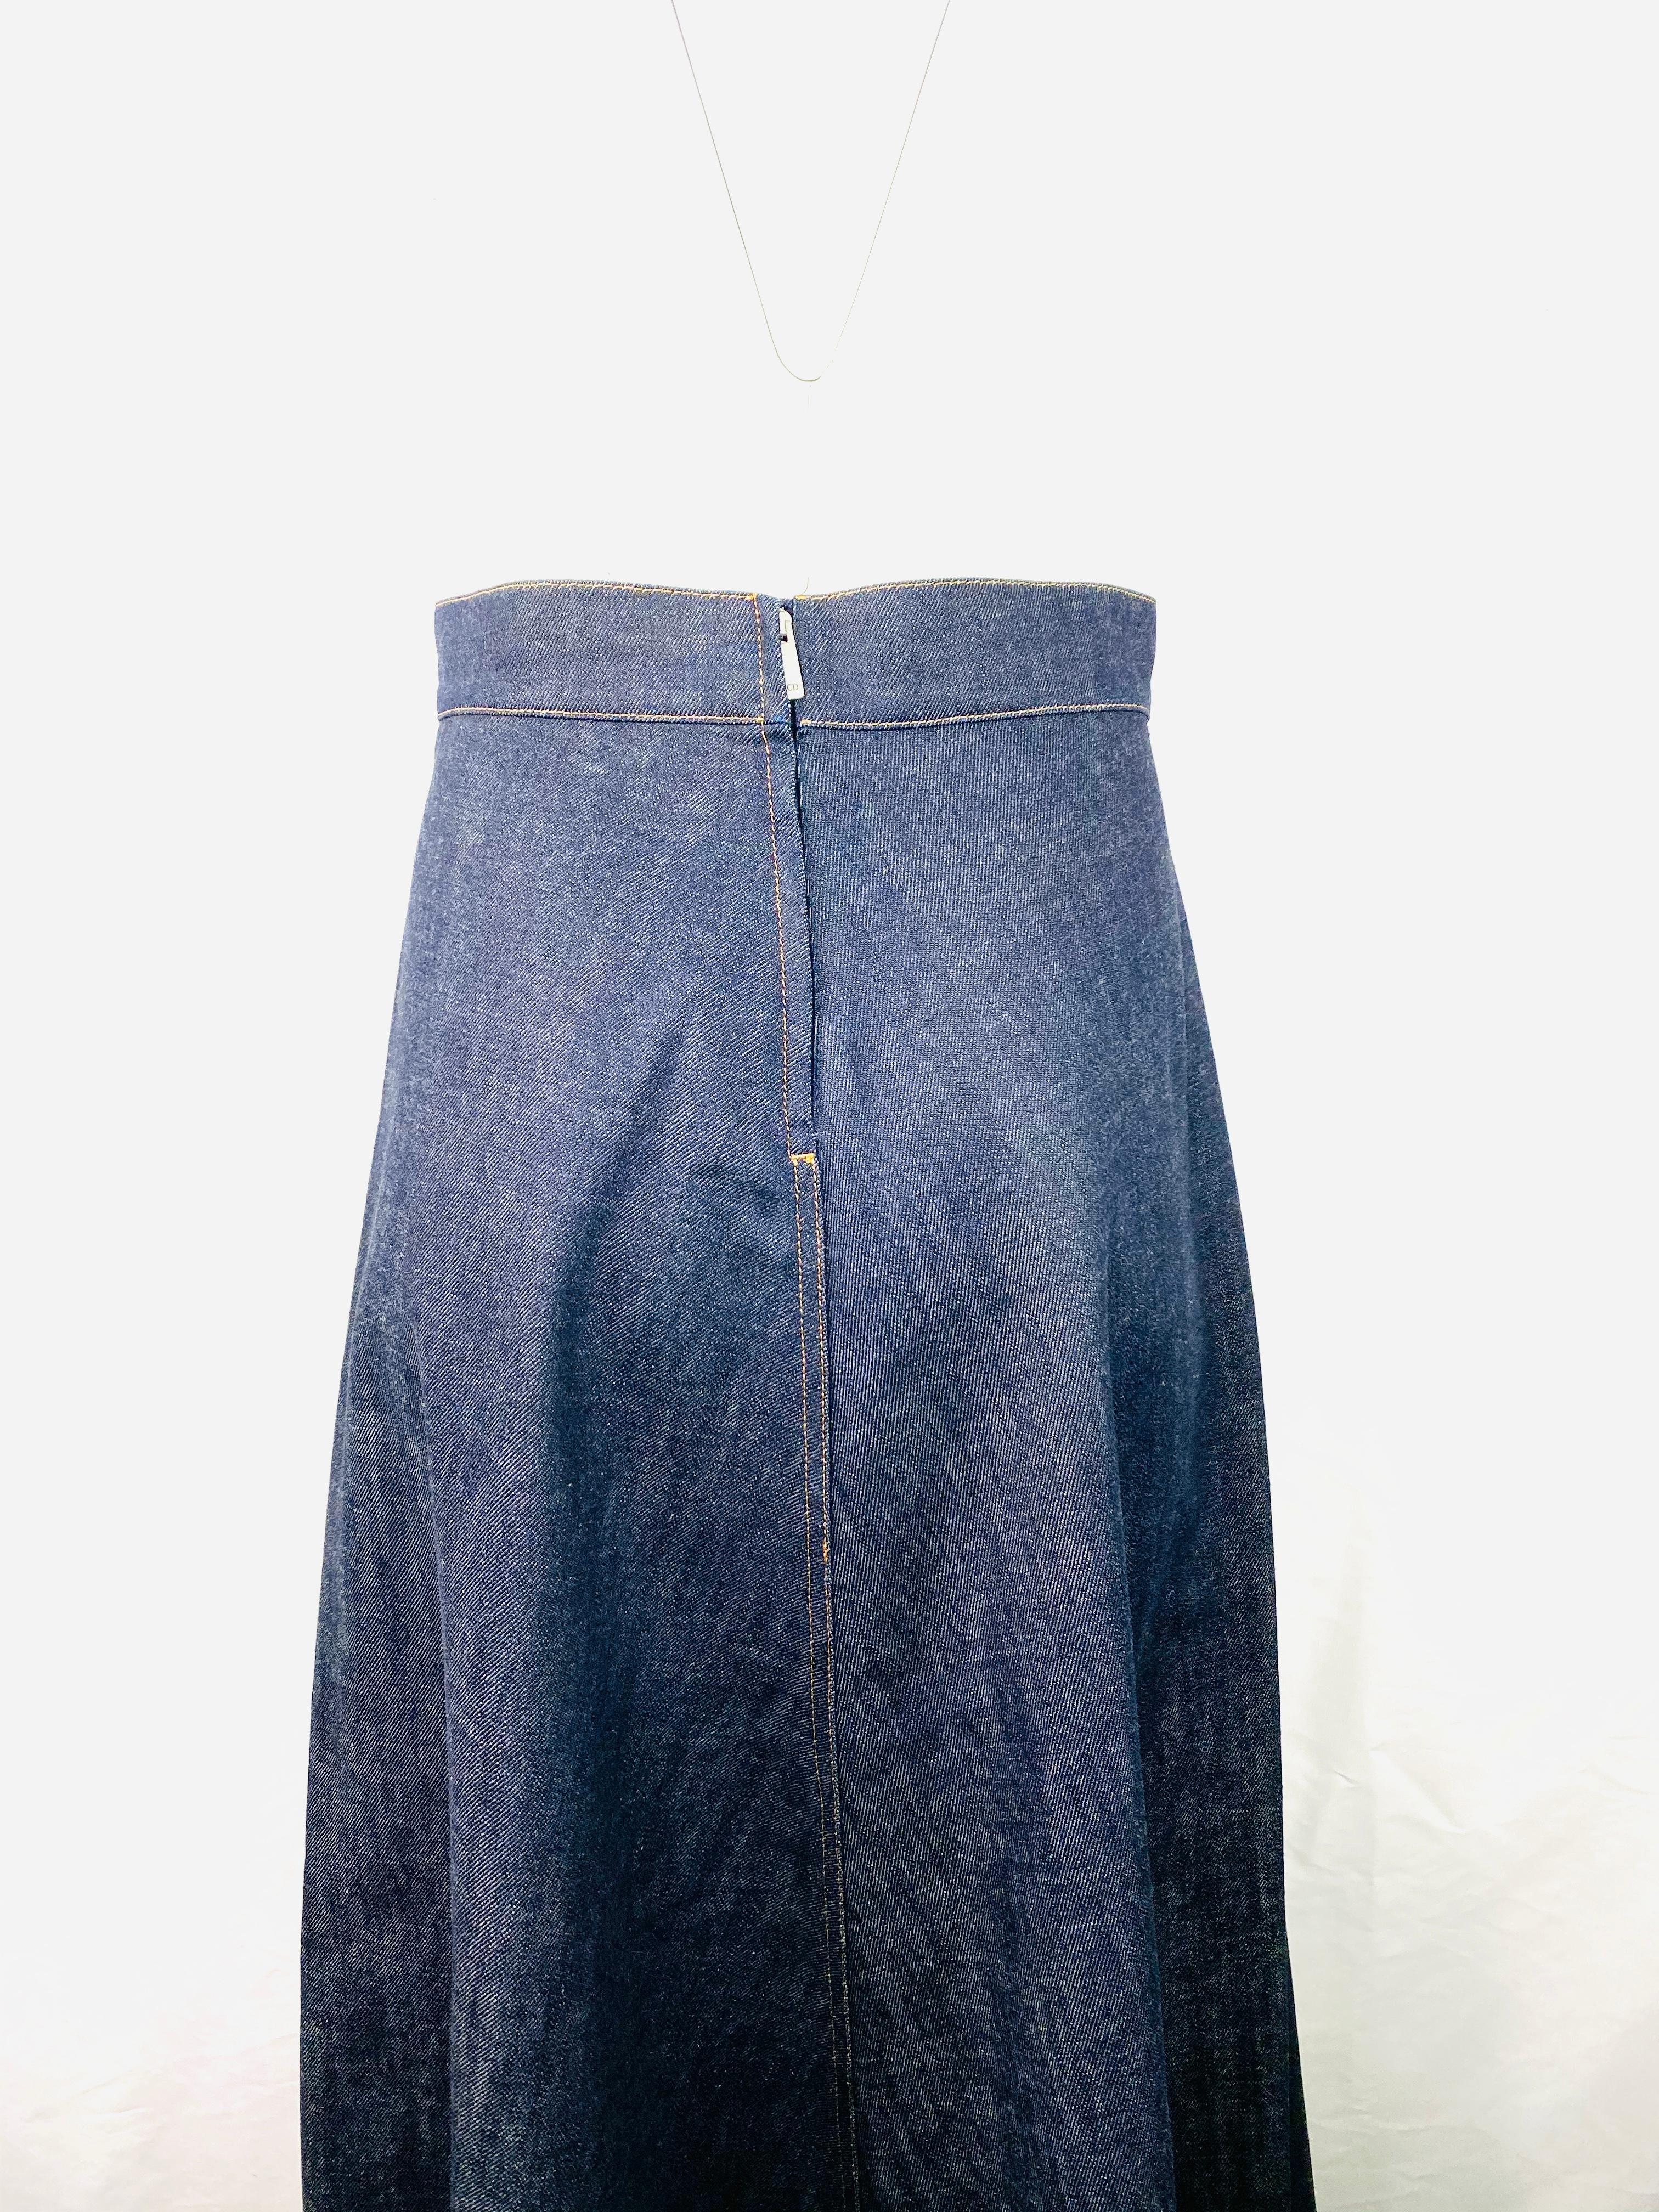 Christian Dior Denim Maxi Skirt Size 38 In Excellent Condition In Beverly Hills, CA